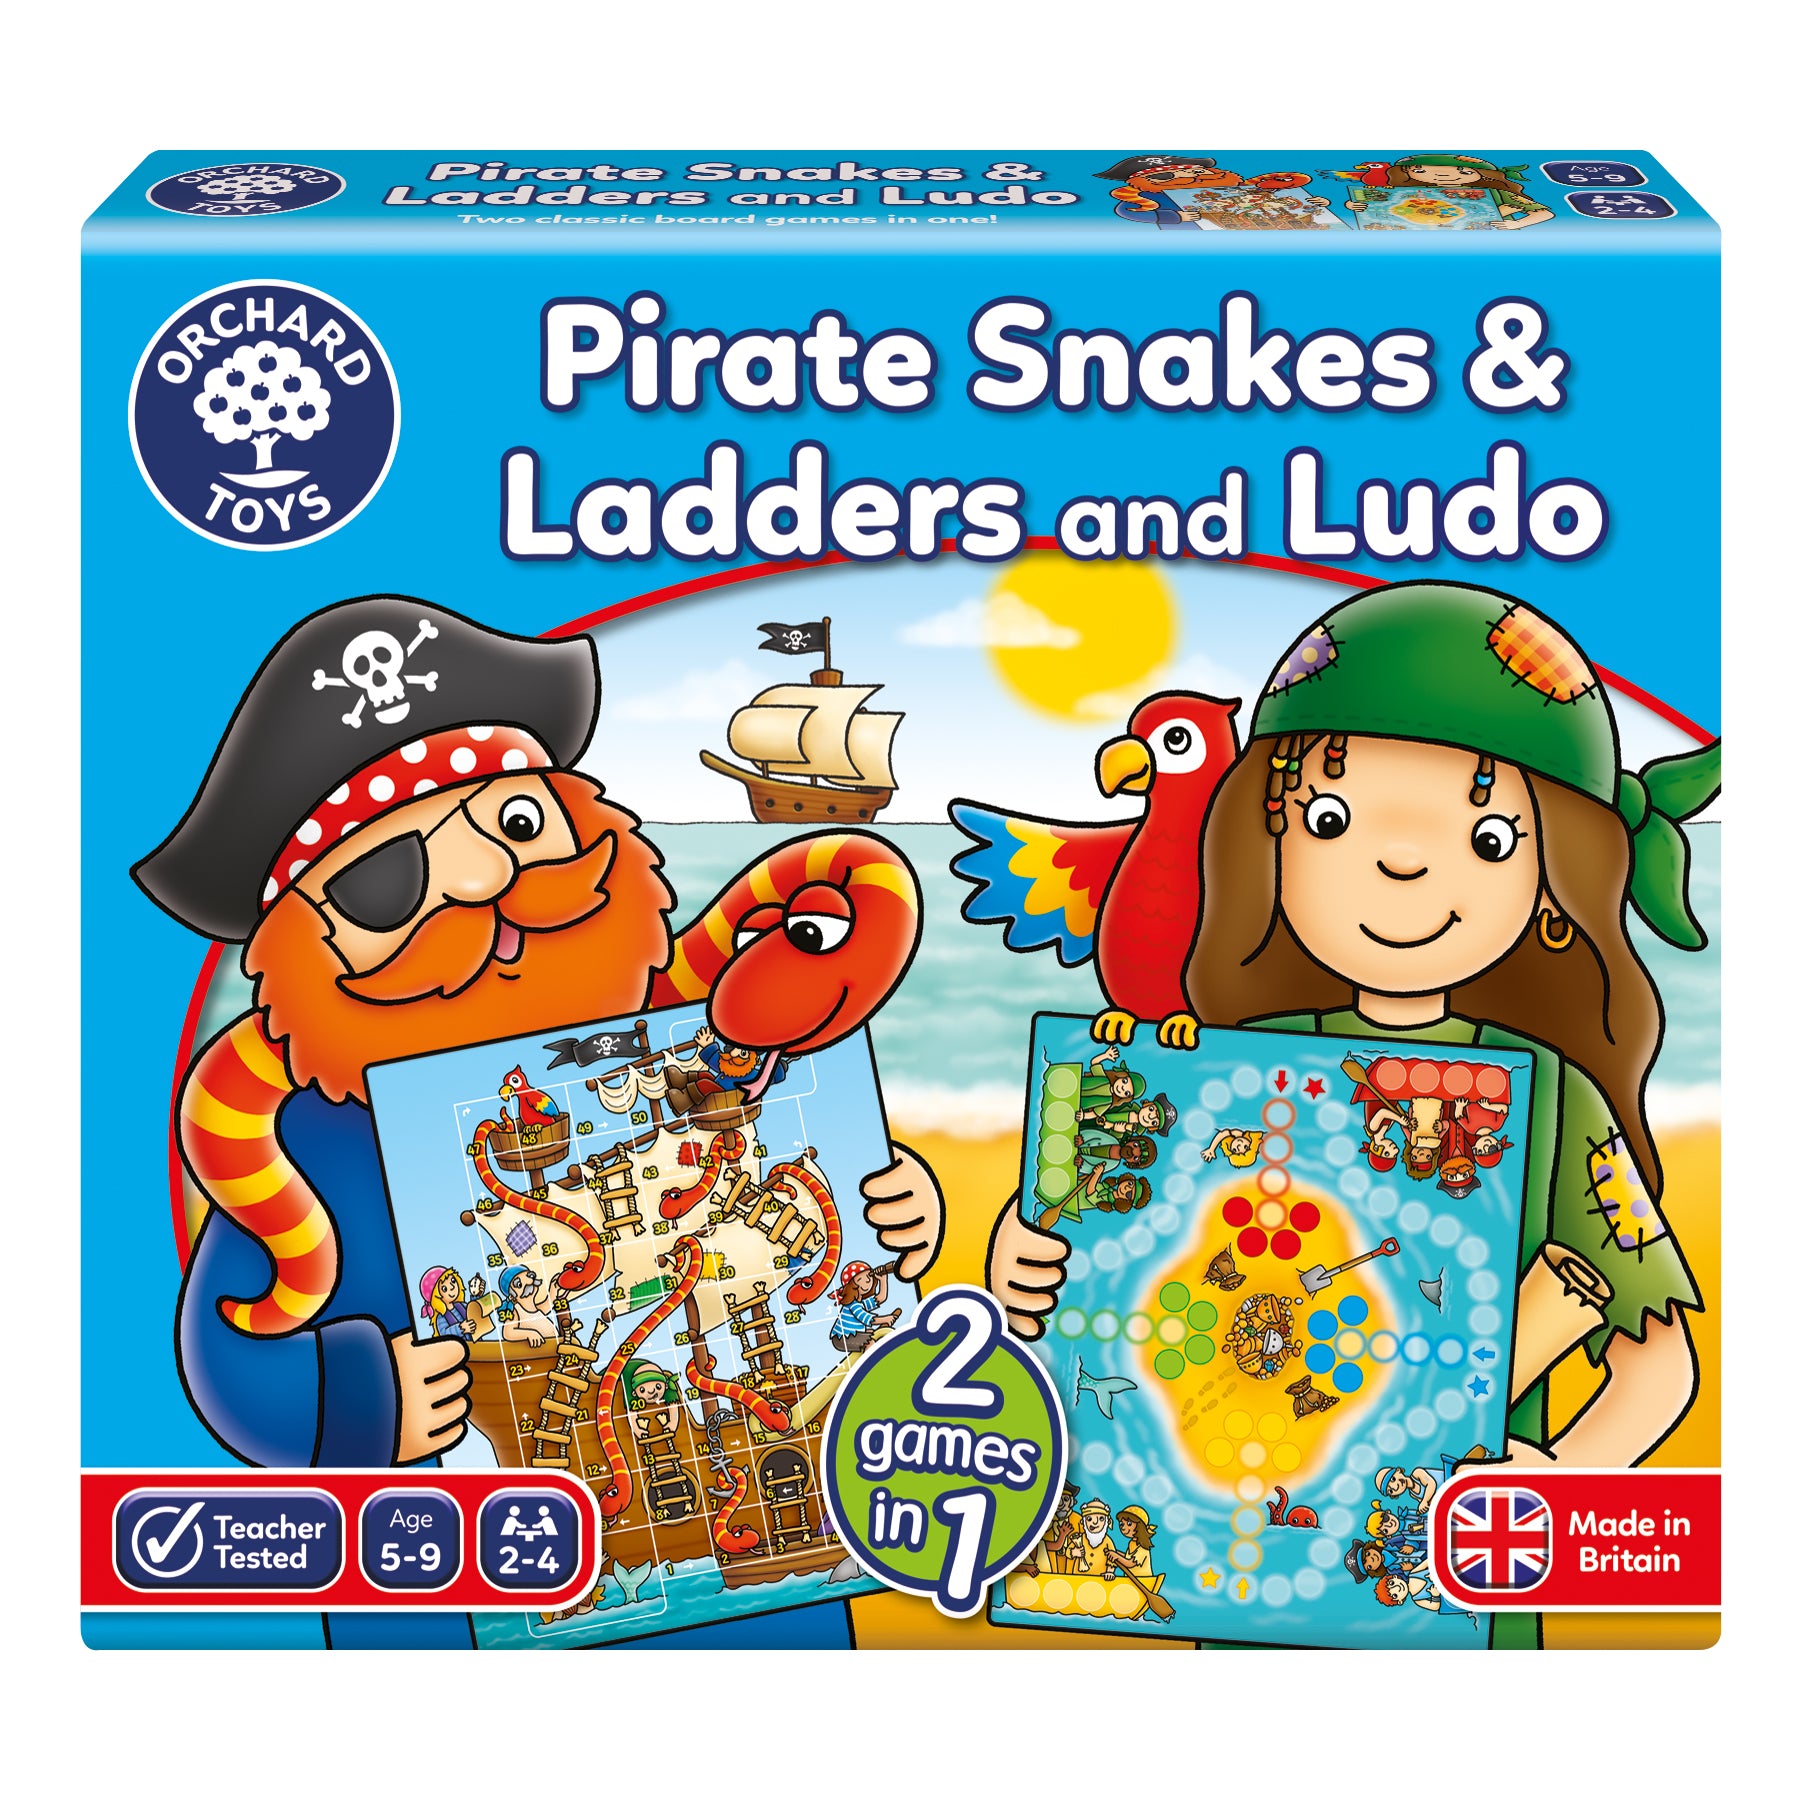 Orchard Pirate Snakes & Ladders And Ludo